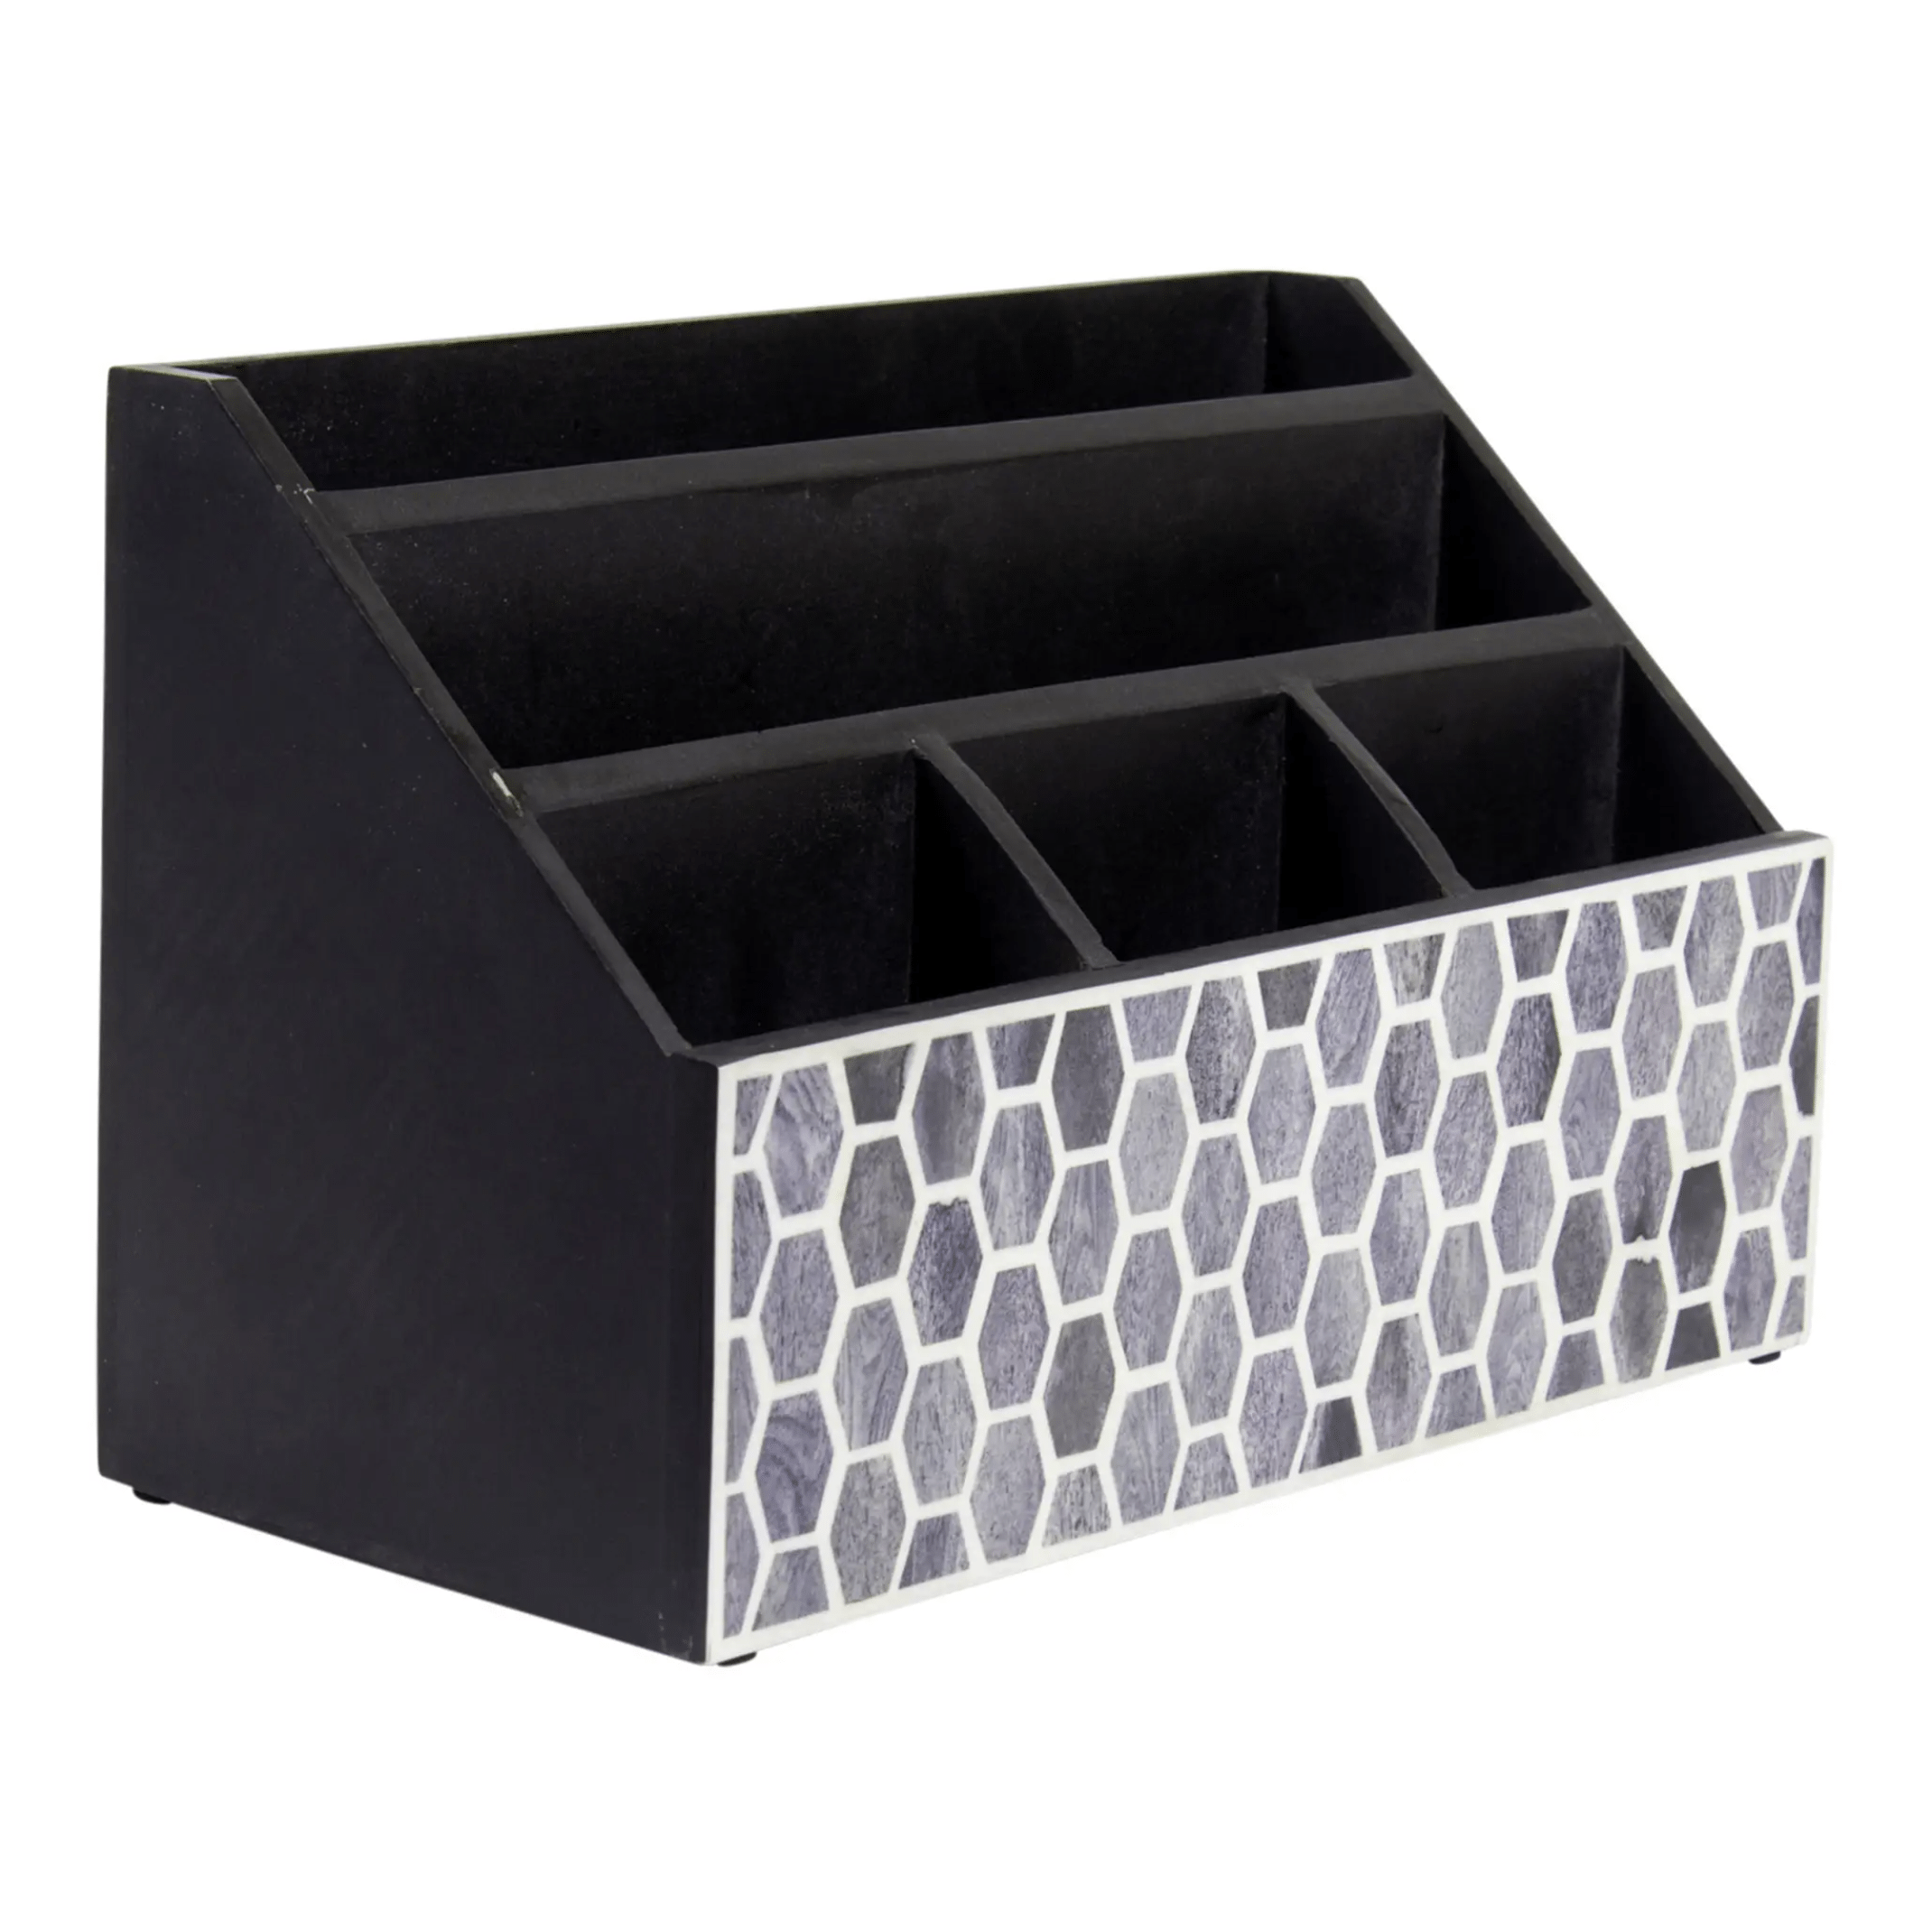 Stylish grey and white bone inlay desk organiser home decor and accessories for your coffee table and dining room grey and white wood bone